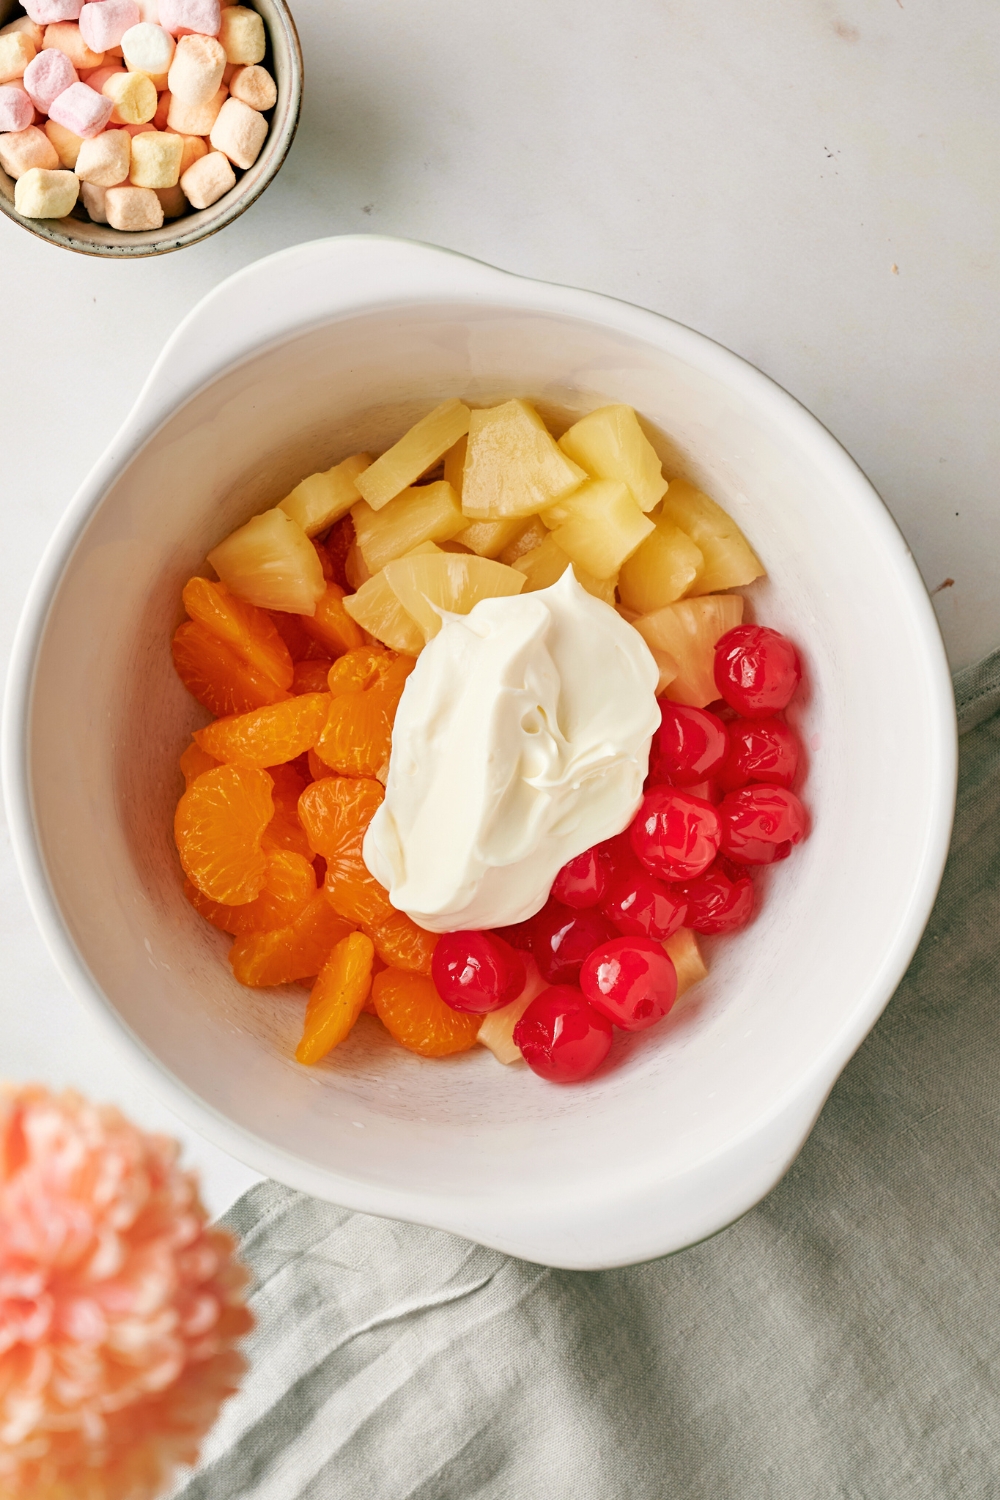 A scoop of Cool Whip on top of mandarin oranges, pineapple chunks, and maraschino cherries in a bowl.